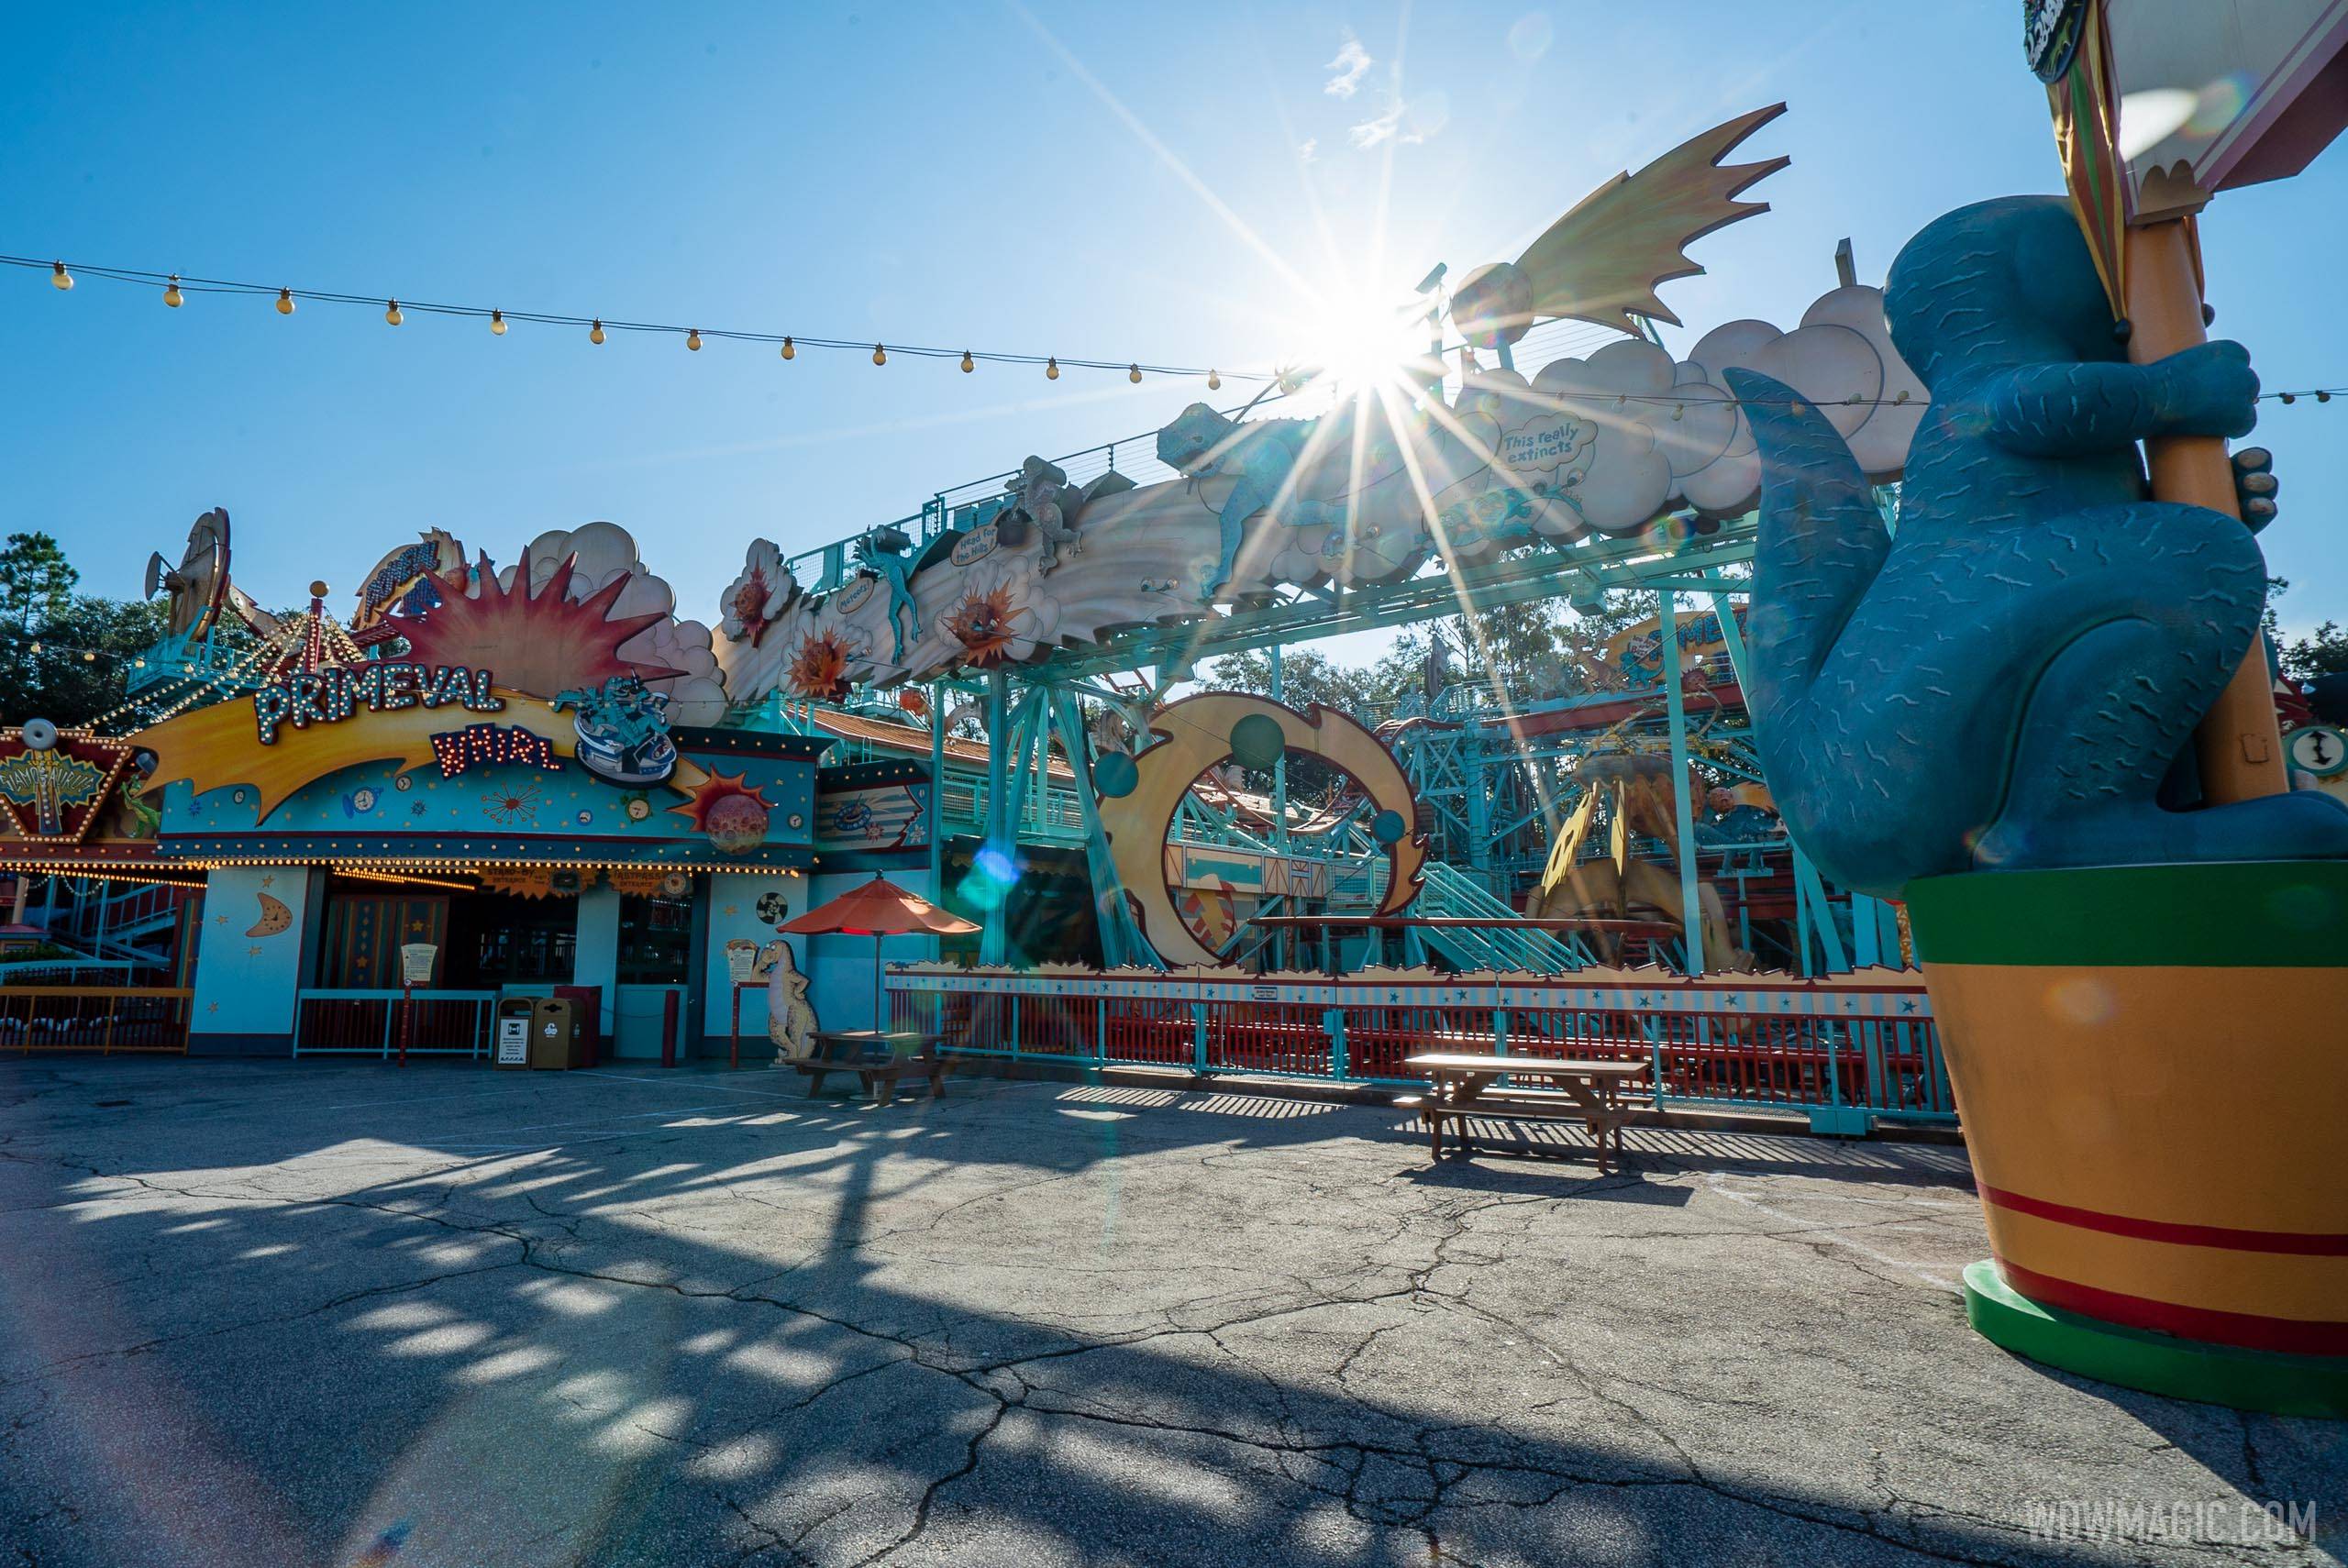 Primeval Whirl closing for a 3 month refurbishment later this month